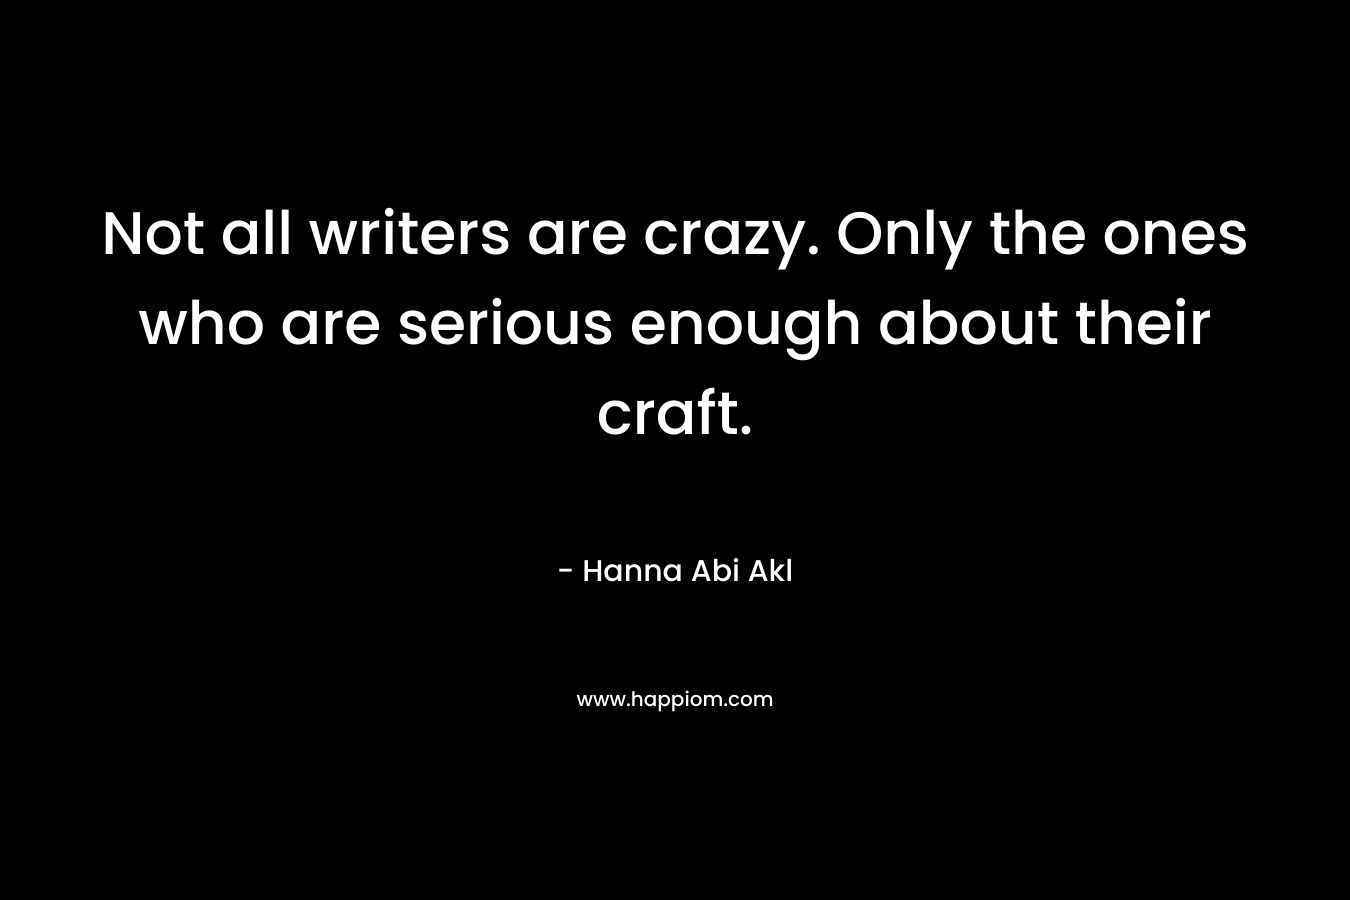 Not all writers are crazy. Only the ones who are serious enough about their craft.